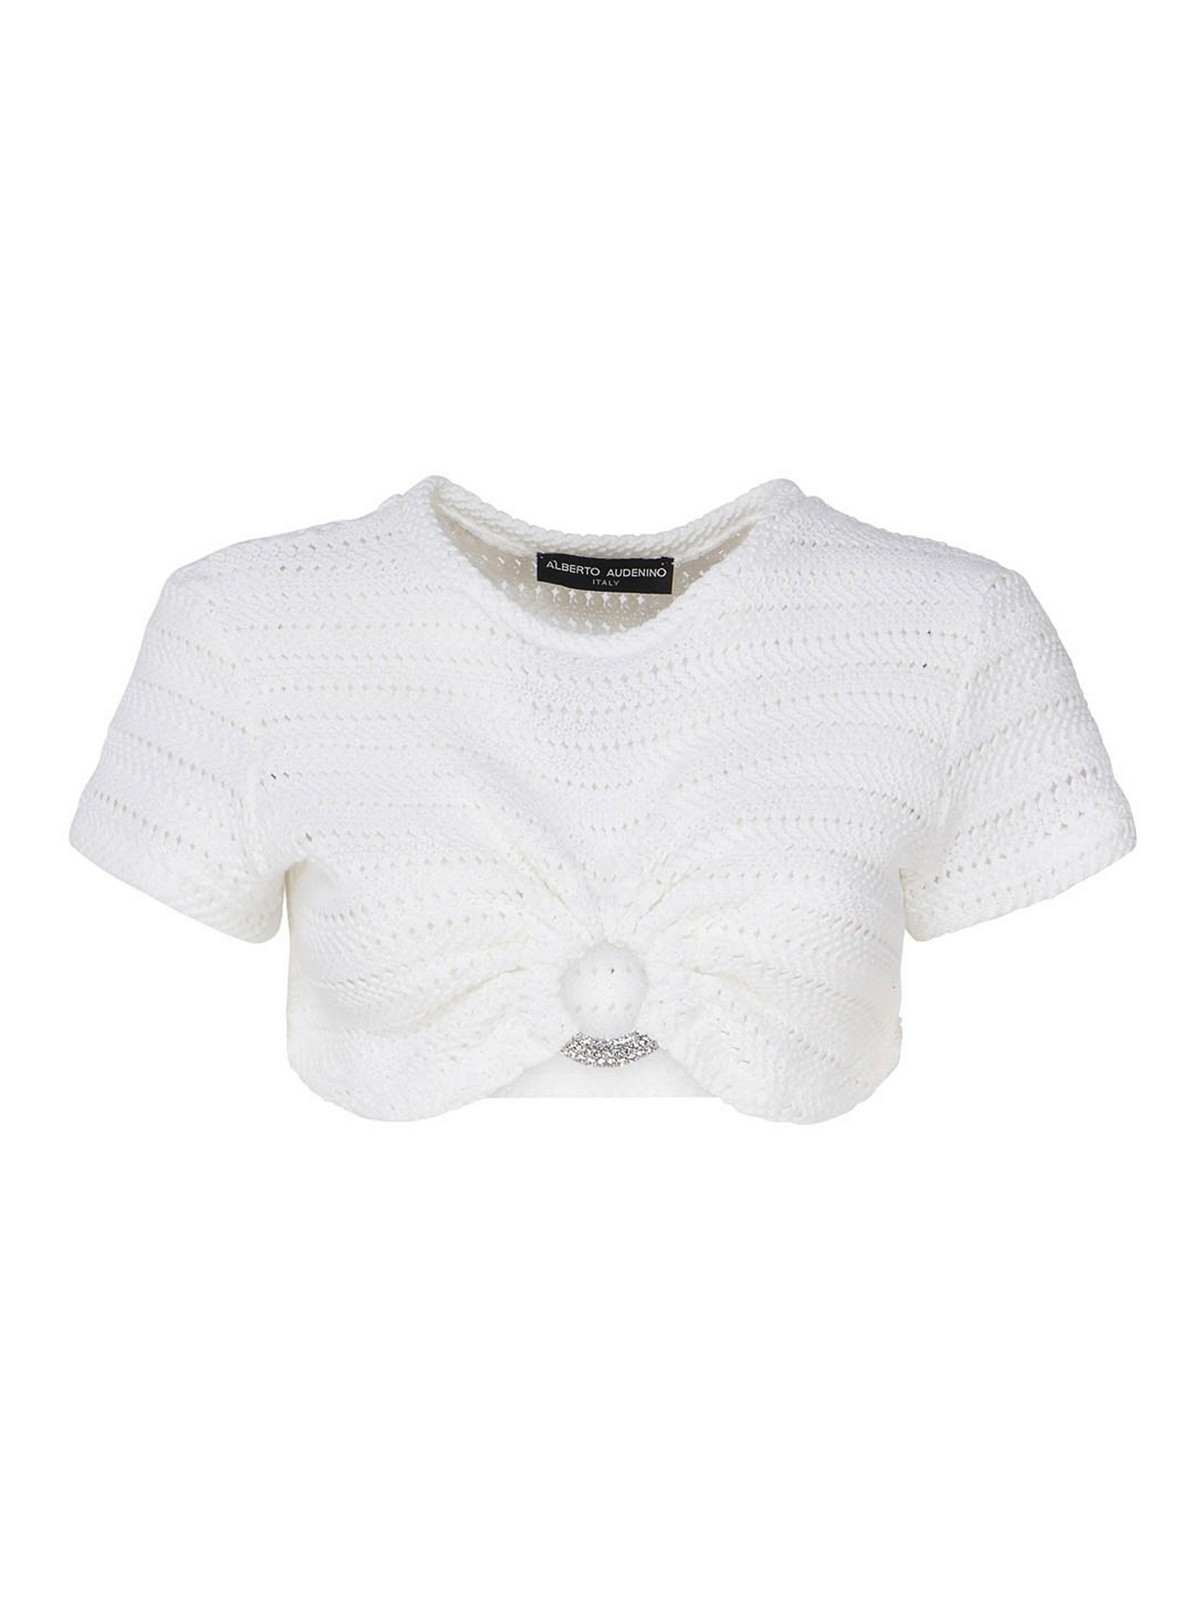 Alberto Audenino Cropped Sweater With Cut- Out Detail In White